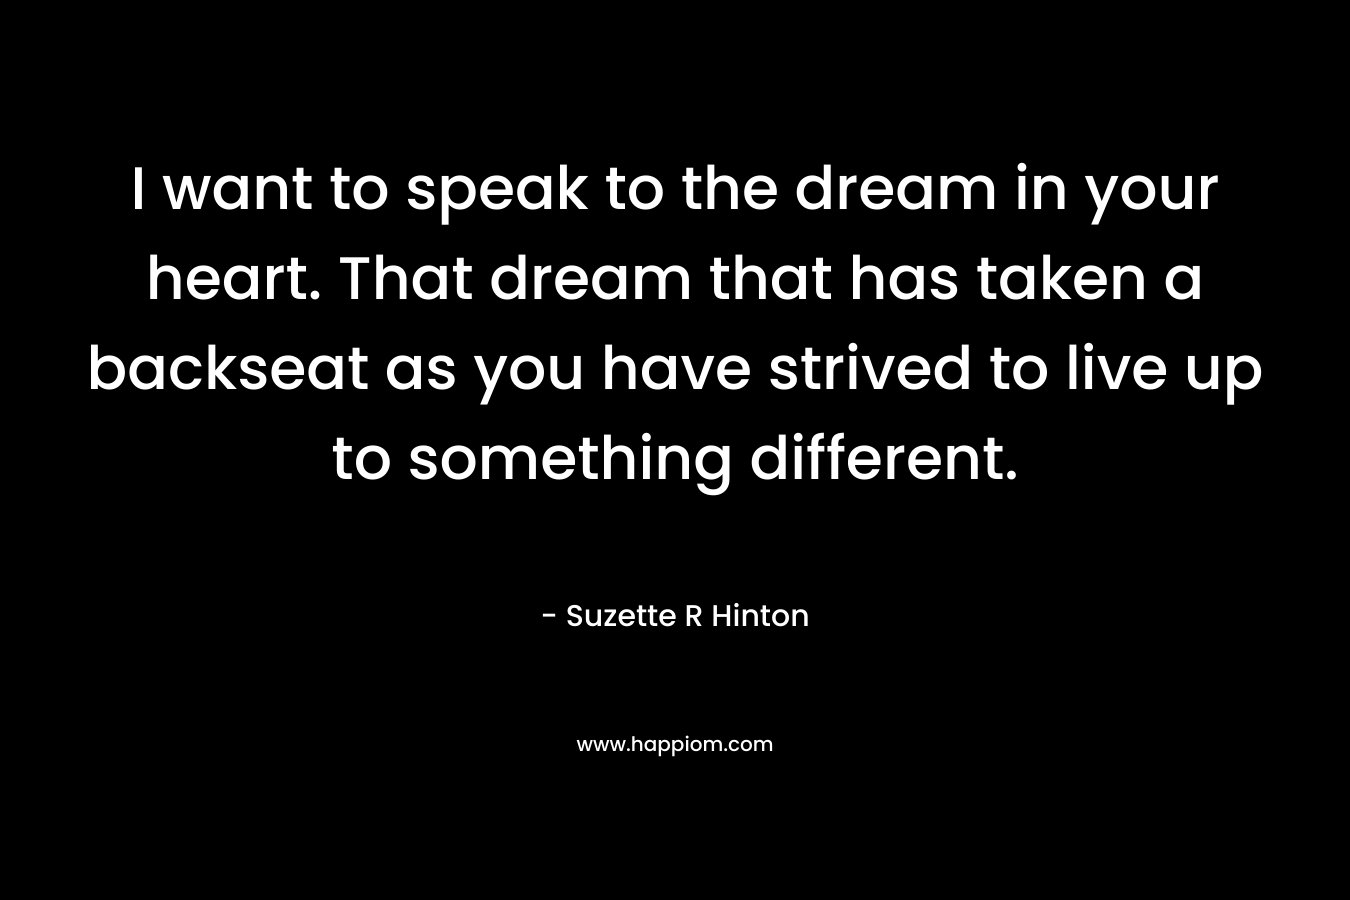 I want to speak to the dream in your heart. That dream that has taken a backseat as you have strived to live up to something different.